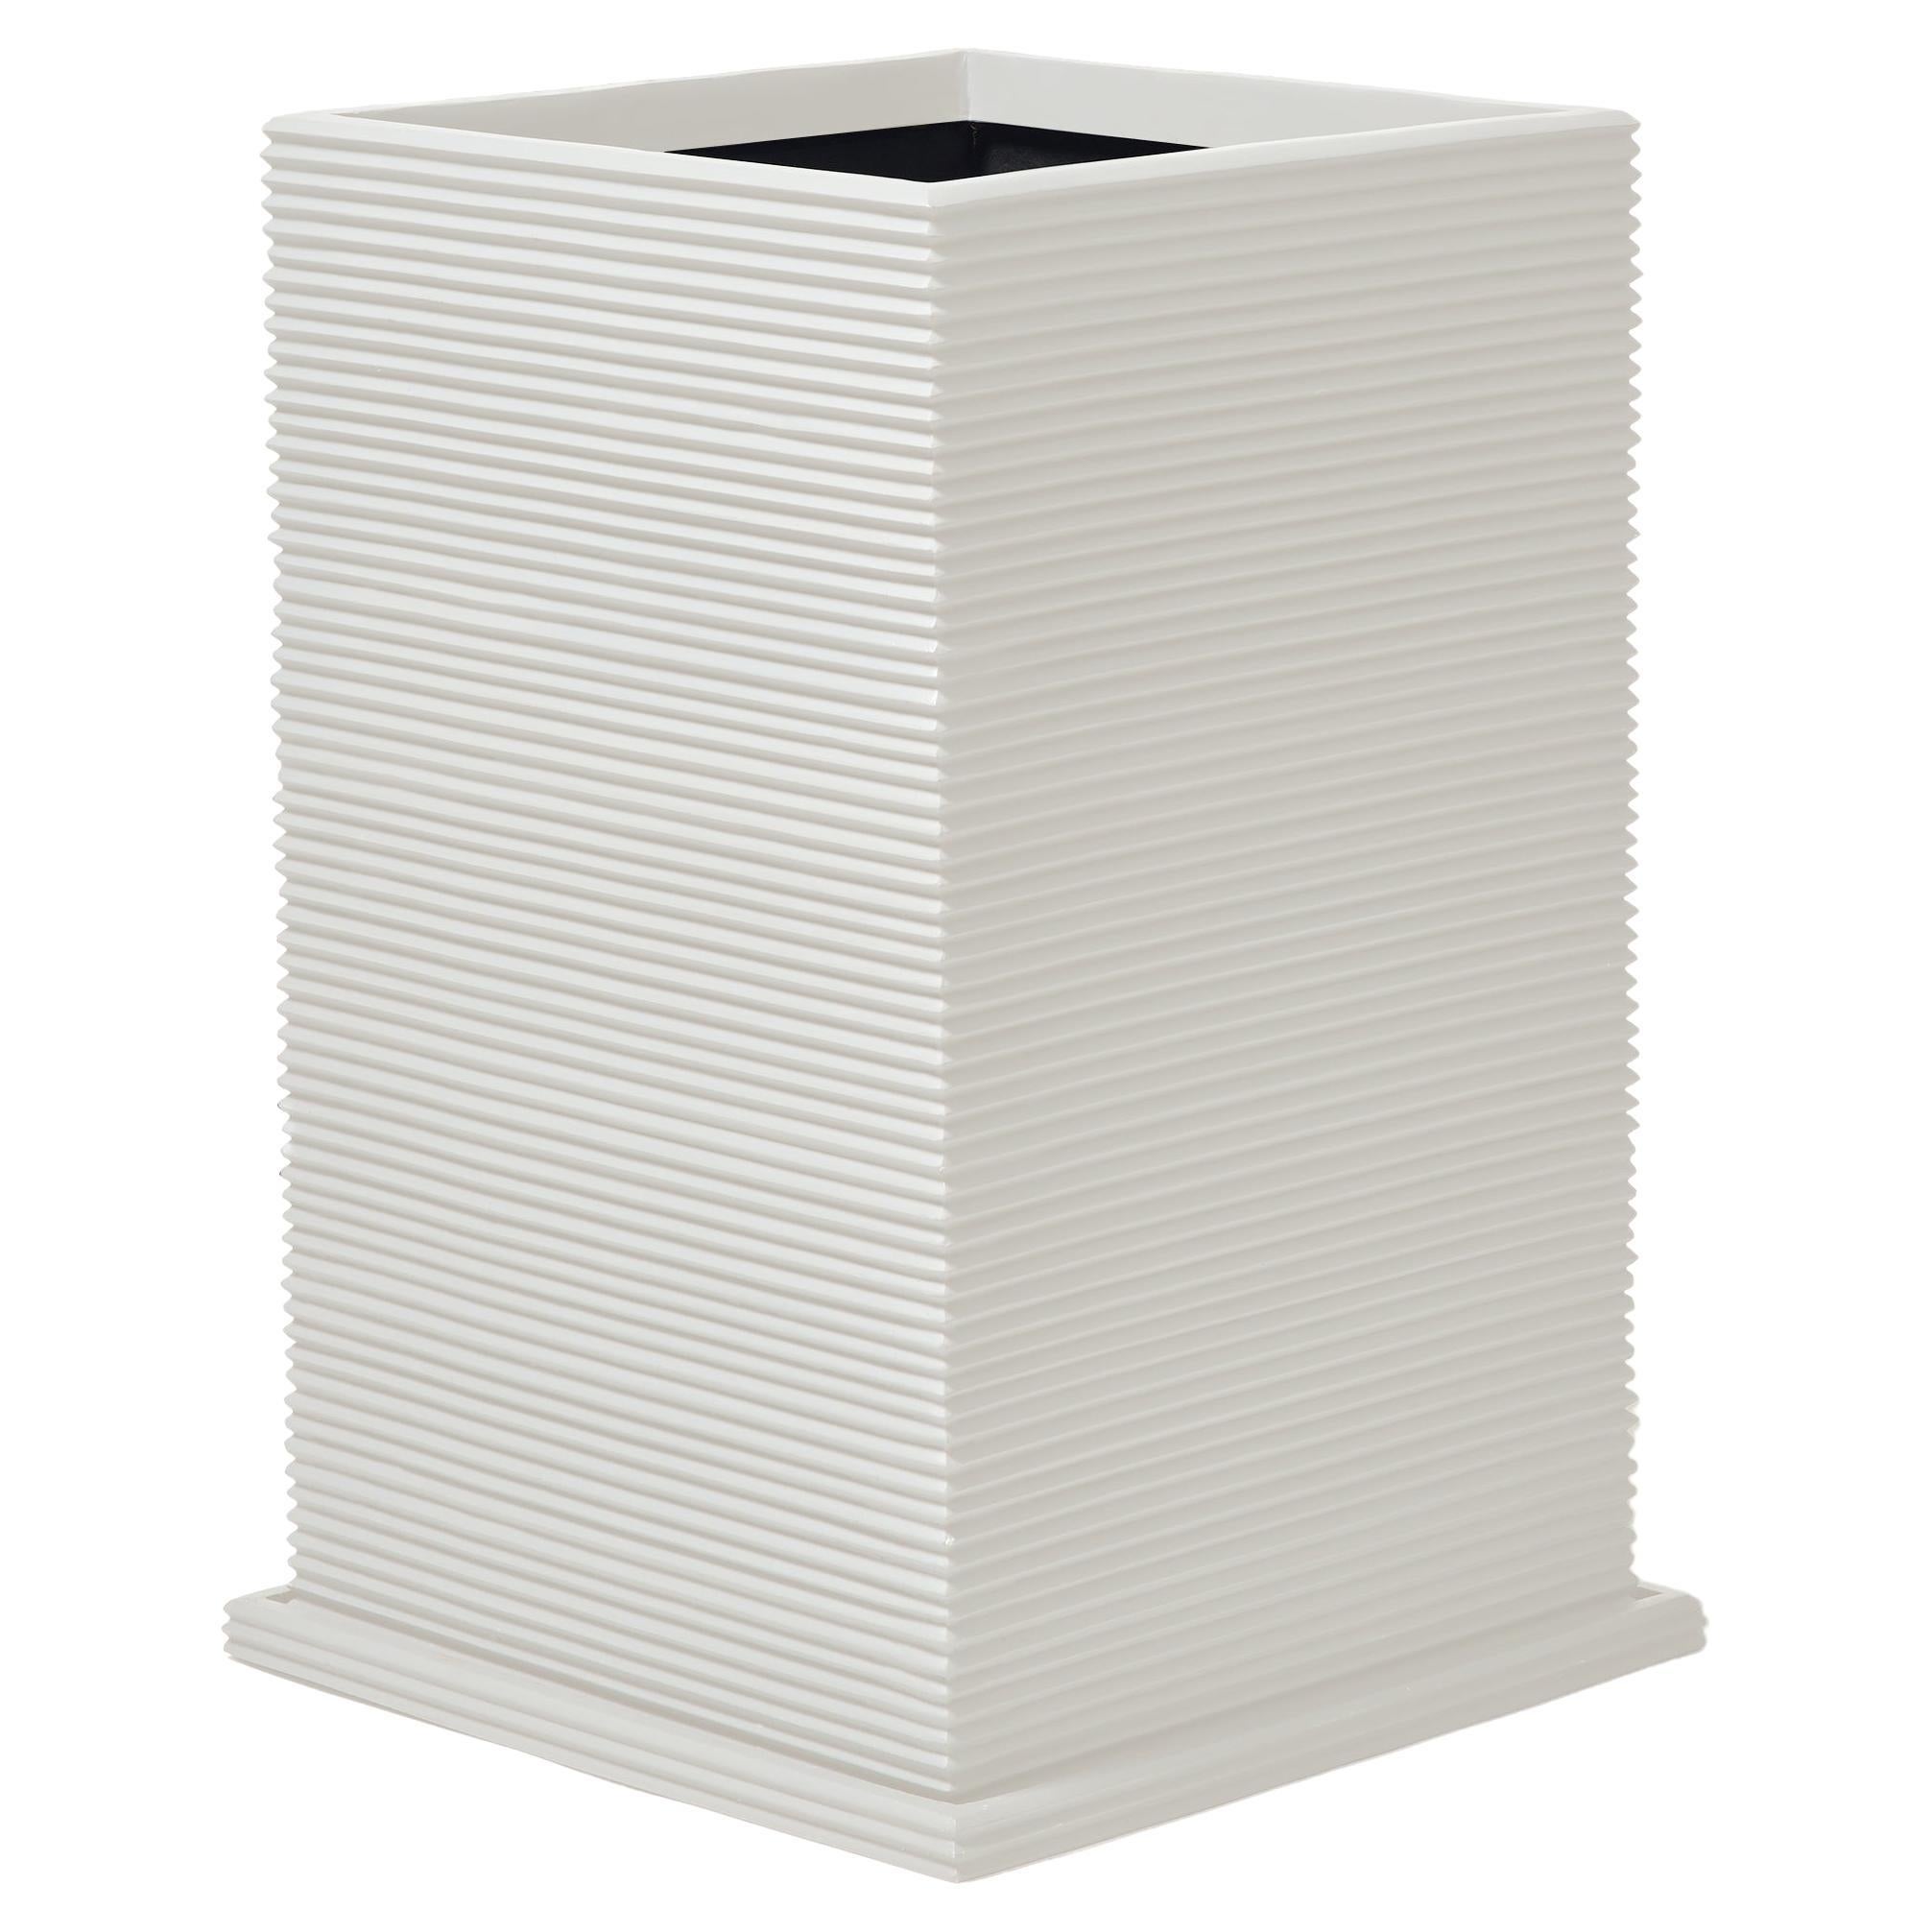 Oversize Tall Rectangular Planter, 'Ivory' by TFM, Rep by Tuleste Factory